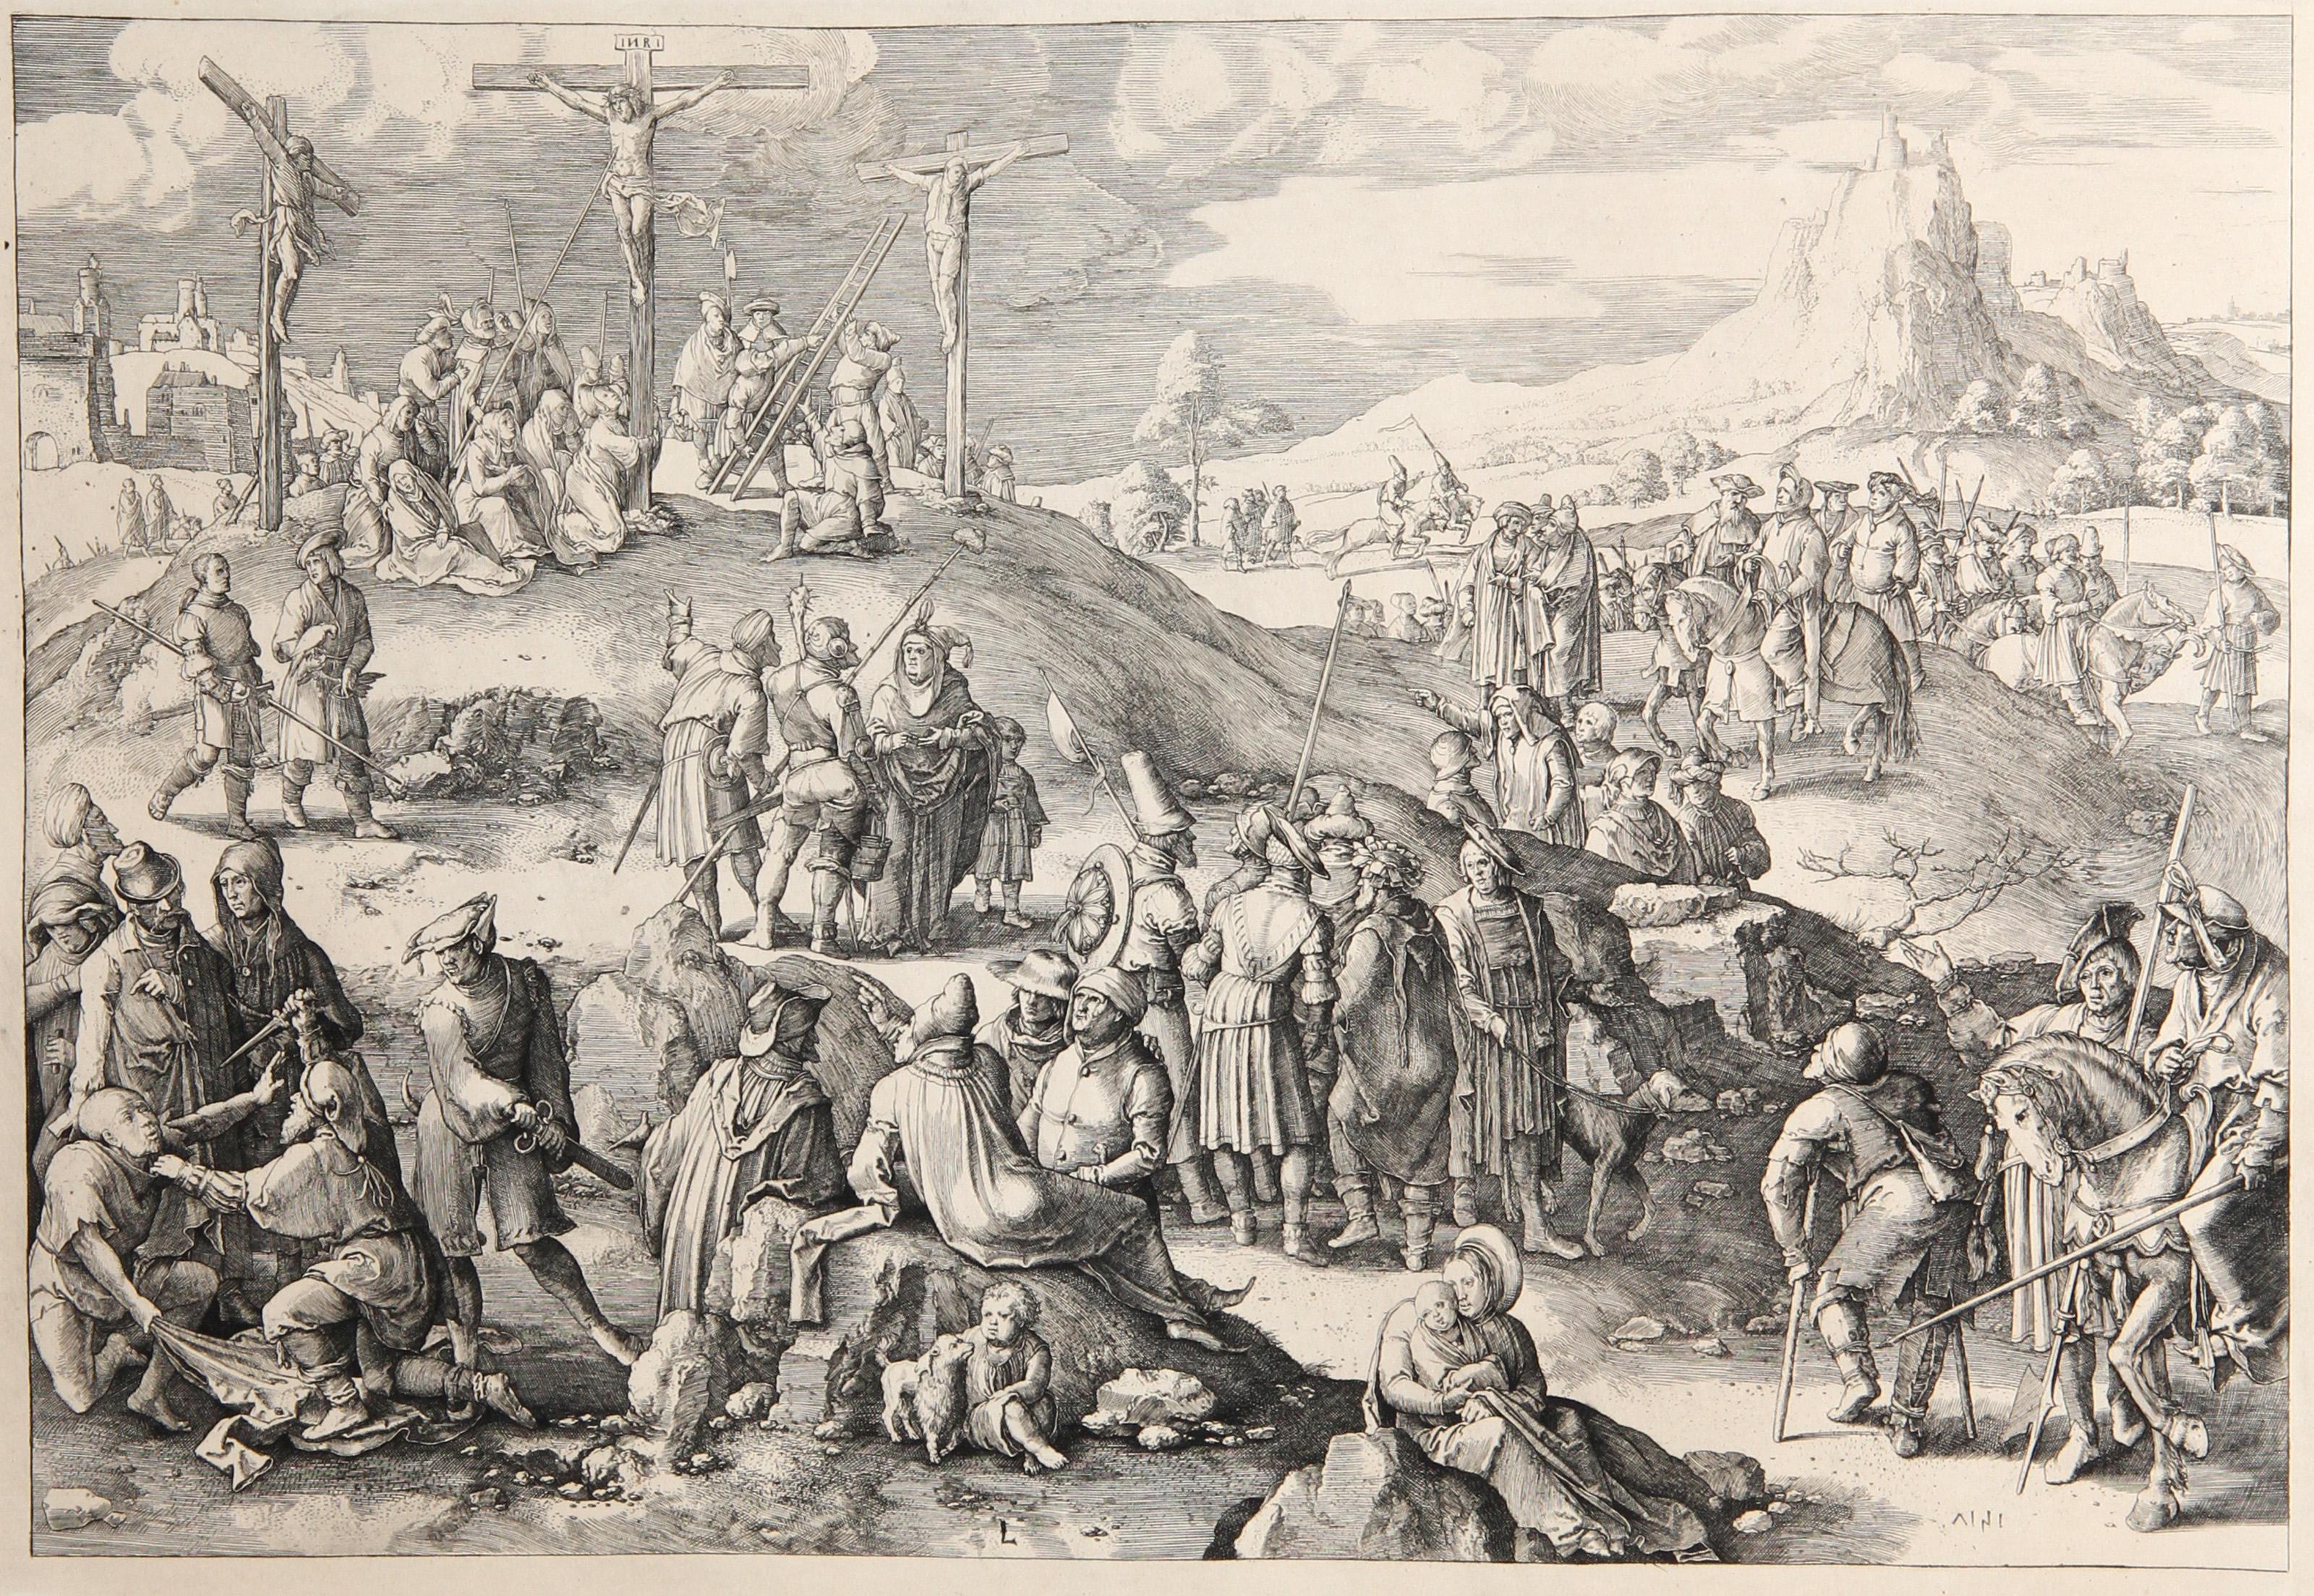 Artist: Lucas van Leyden, After by Amand Durand, Dutch (1494 - 1533) - Le Calvaire, Year: 1873, Medium: Heliogravure, Size: 12  x 16.5 in. (30.48  x 41.91 cm), Printer: Amand Durand, Description: French Engraver and painter Charles Amand Durand,